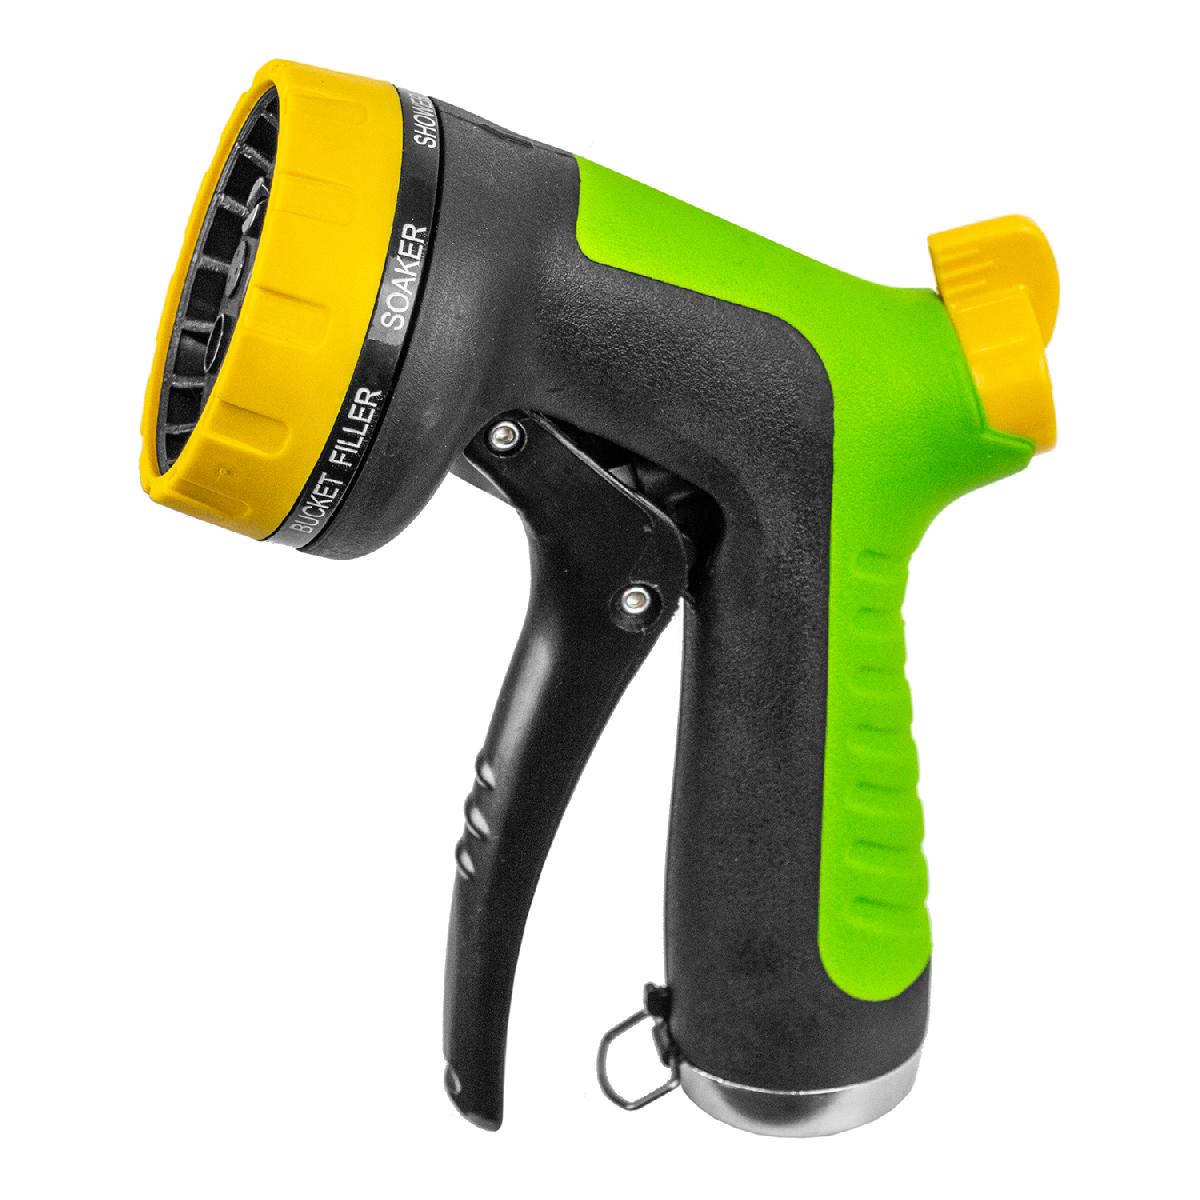 7 PATTERN TRIGGER WATERING NOZZLE